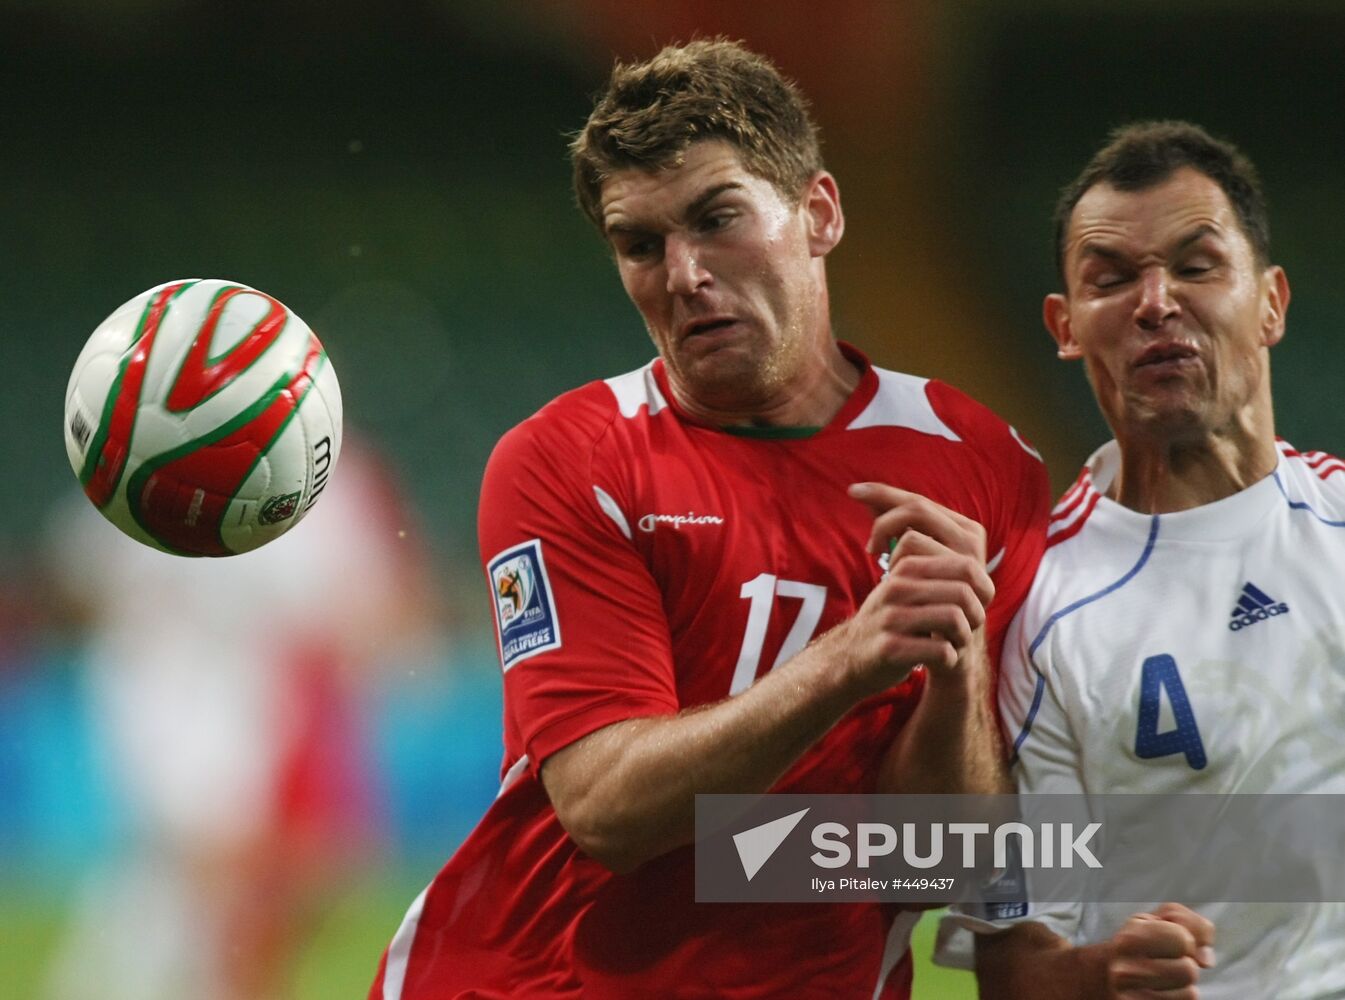 Football. FIFA World Cup 2010 qualifier. Wales vs Russia